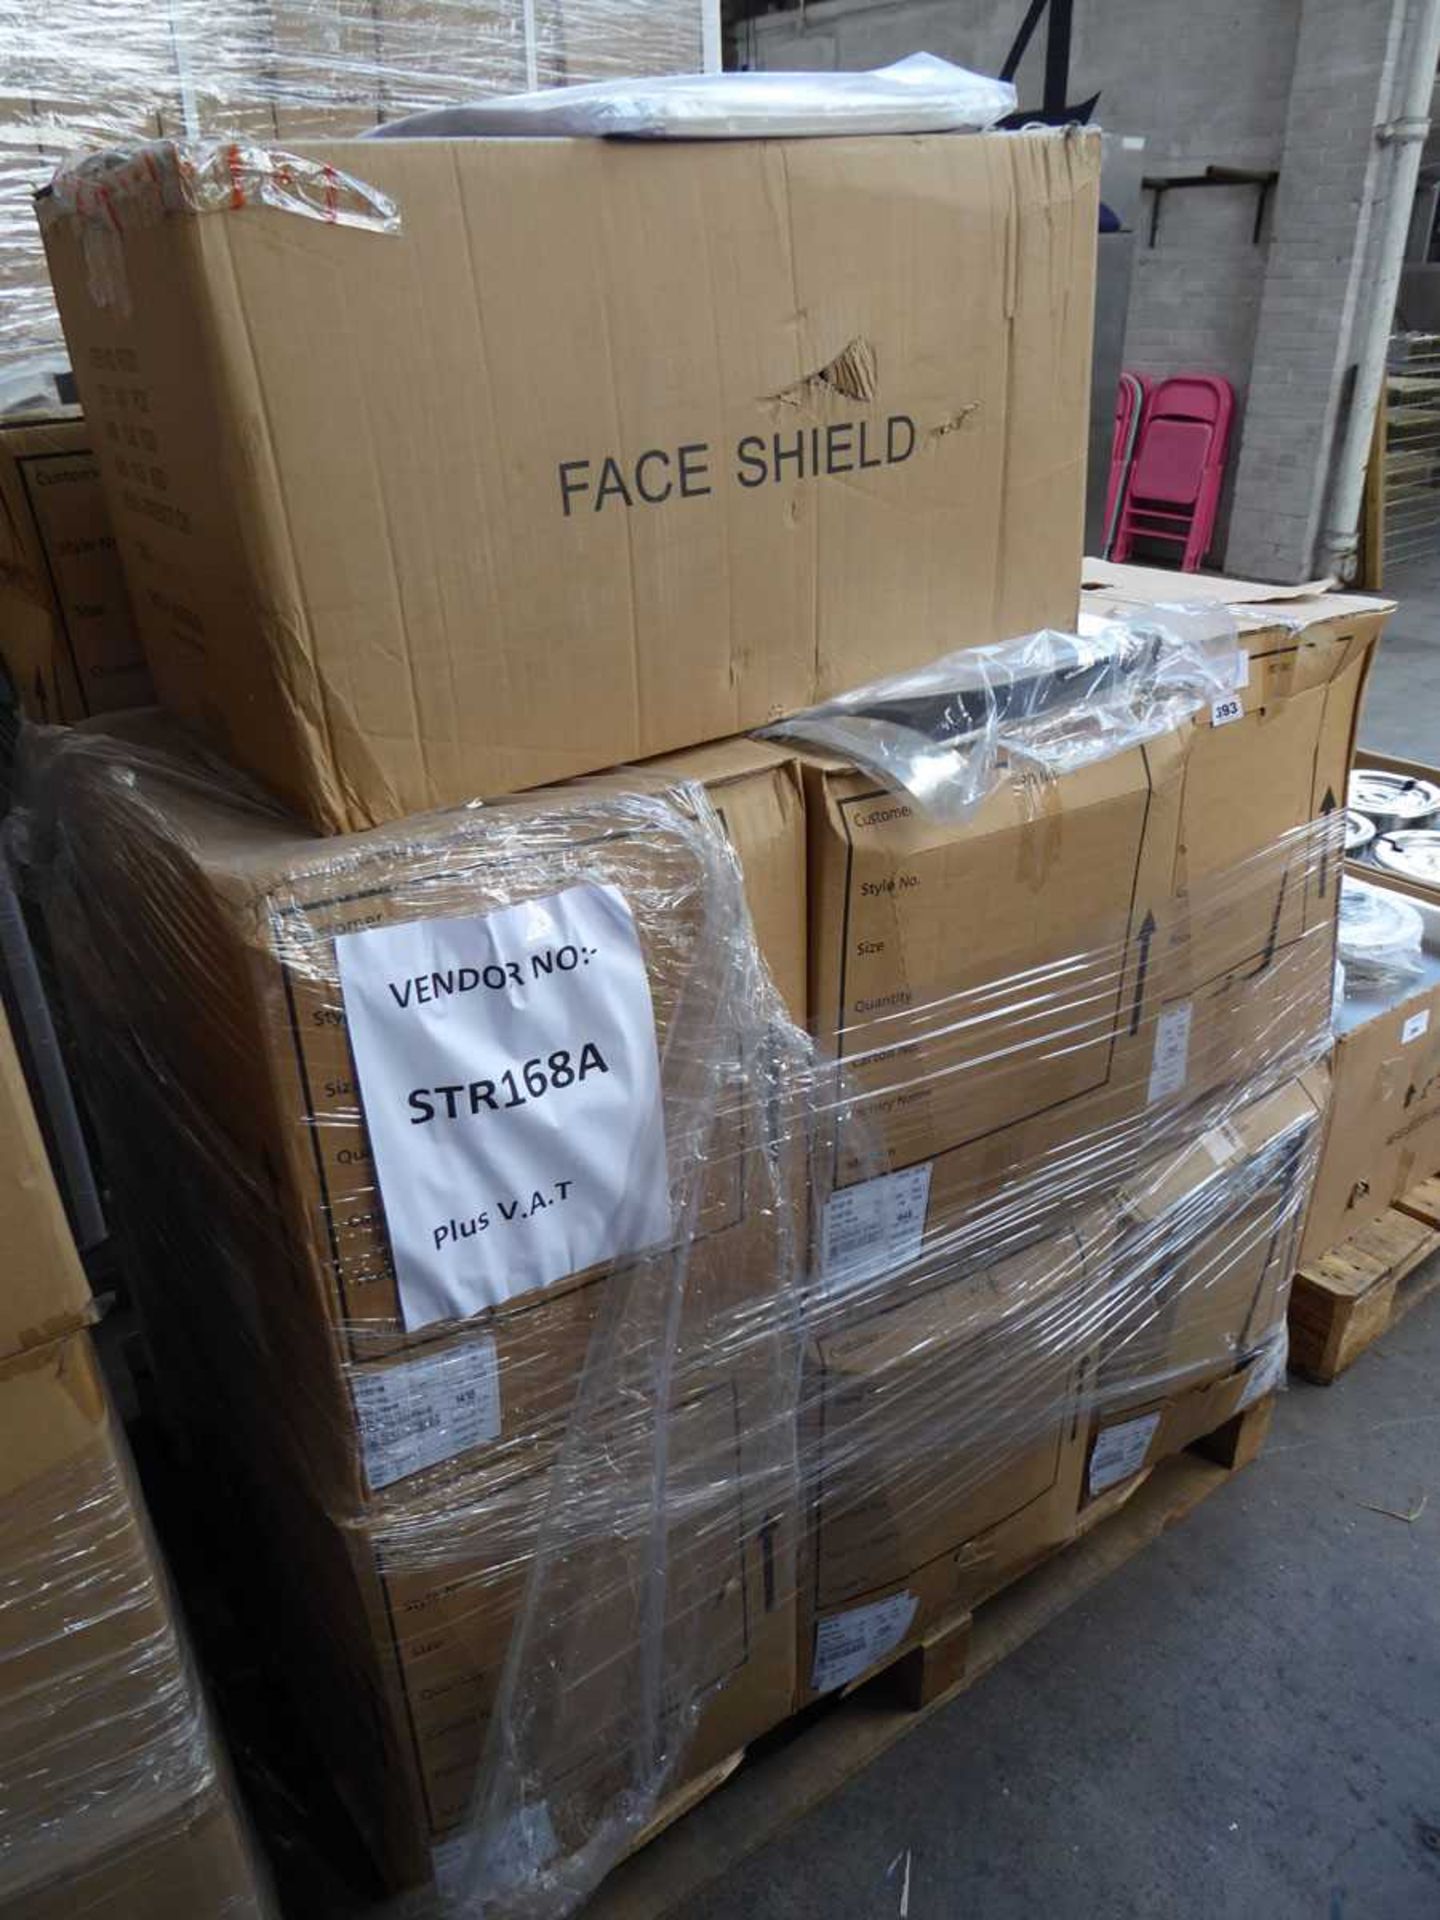 Pallet of face shields